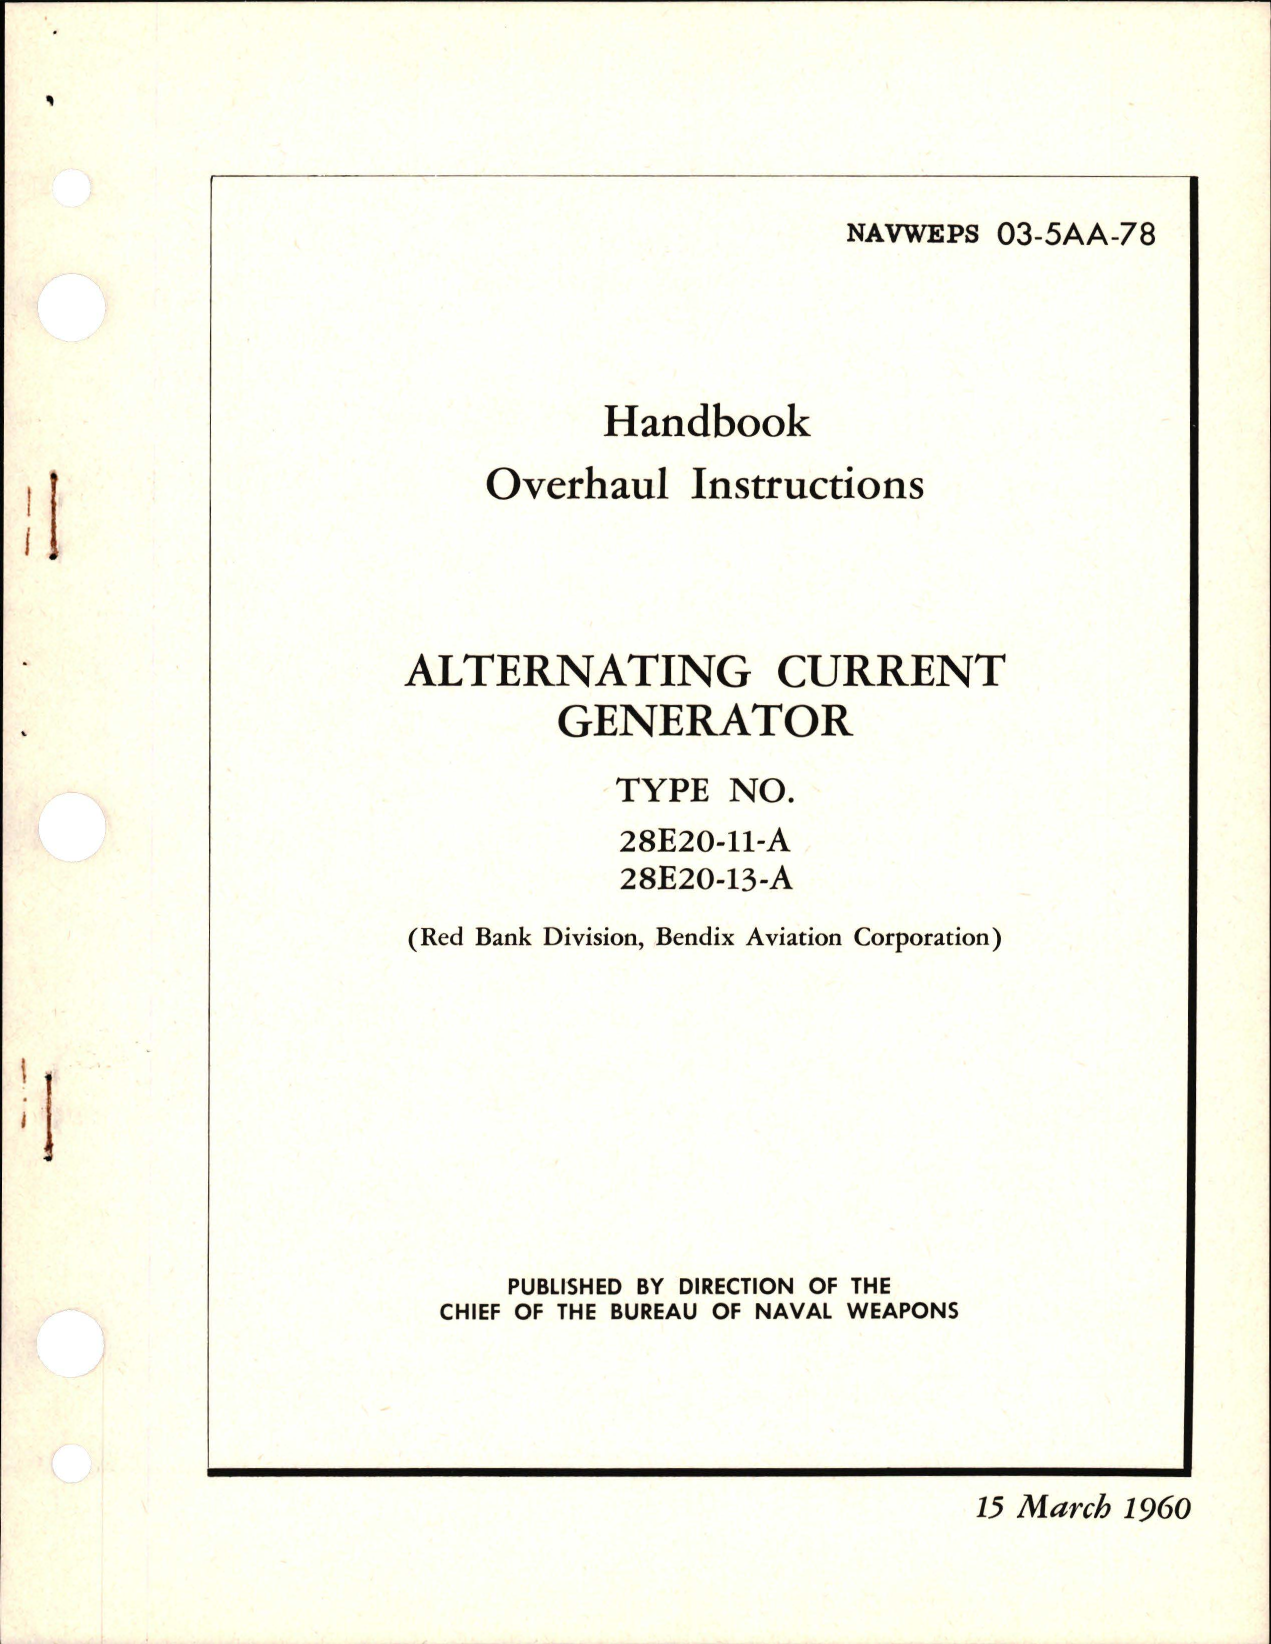 Sample page 1 from AirCorps Library document: Overhaul Instructions for Alternating Current Generator - Types 28E20-11-A and 28E20-13-A